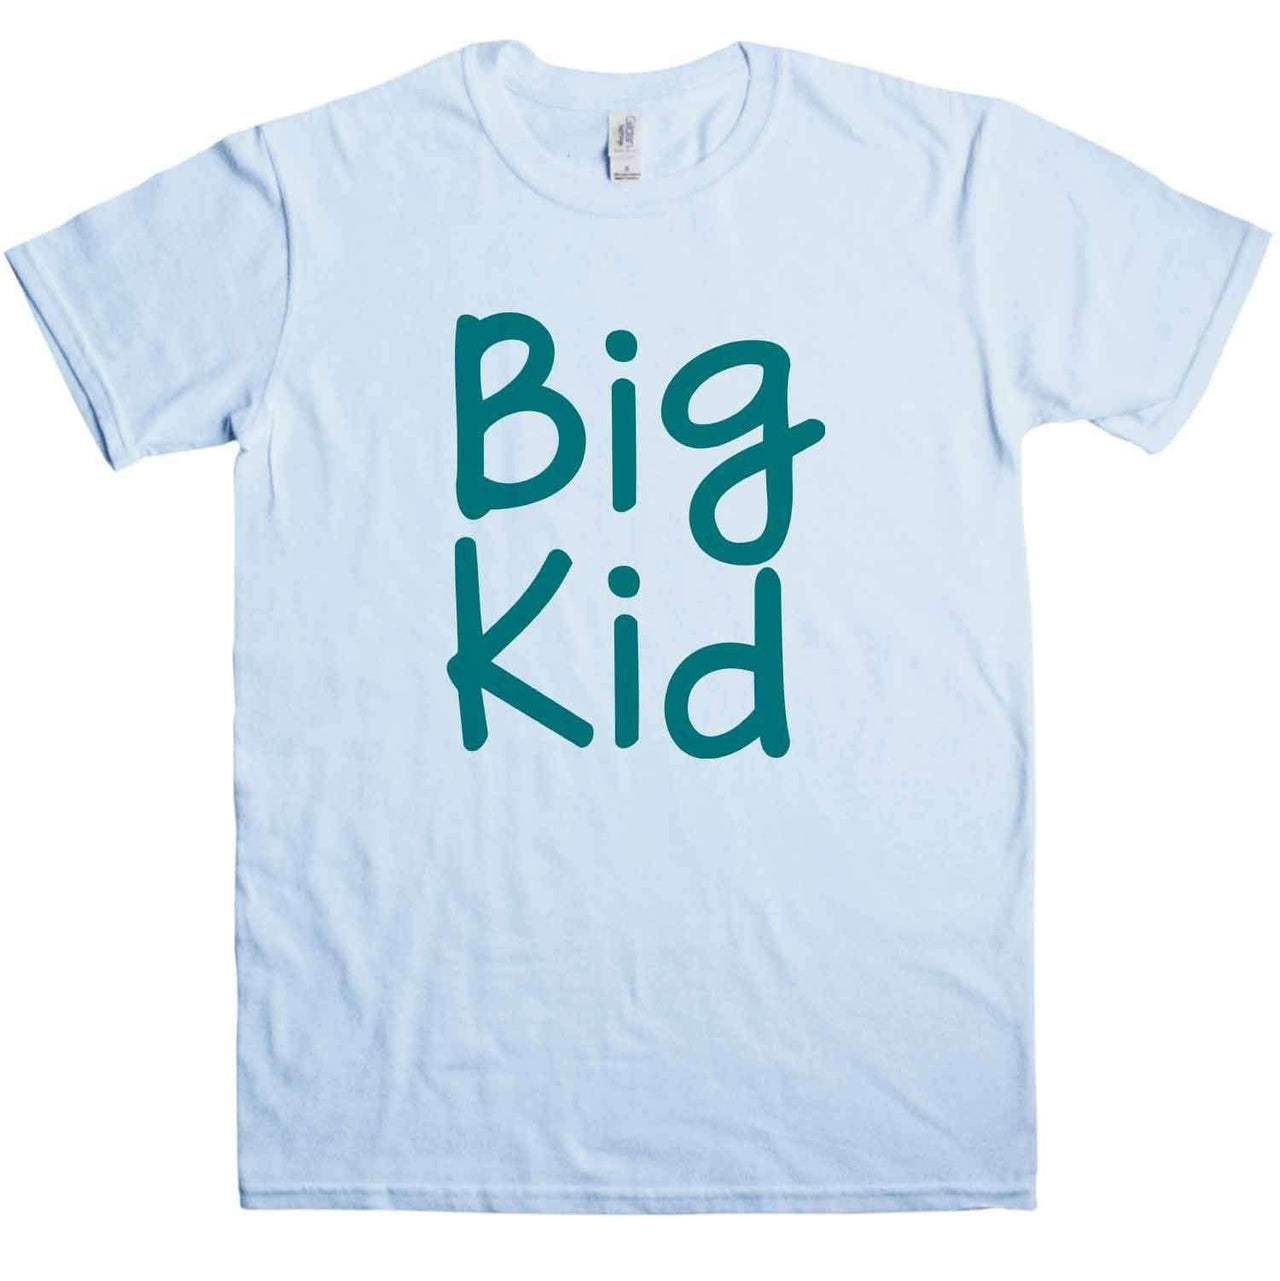 Big Kid Little Kid Adult Graphic T-Shirt For Men 8Ball